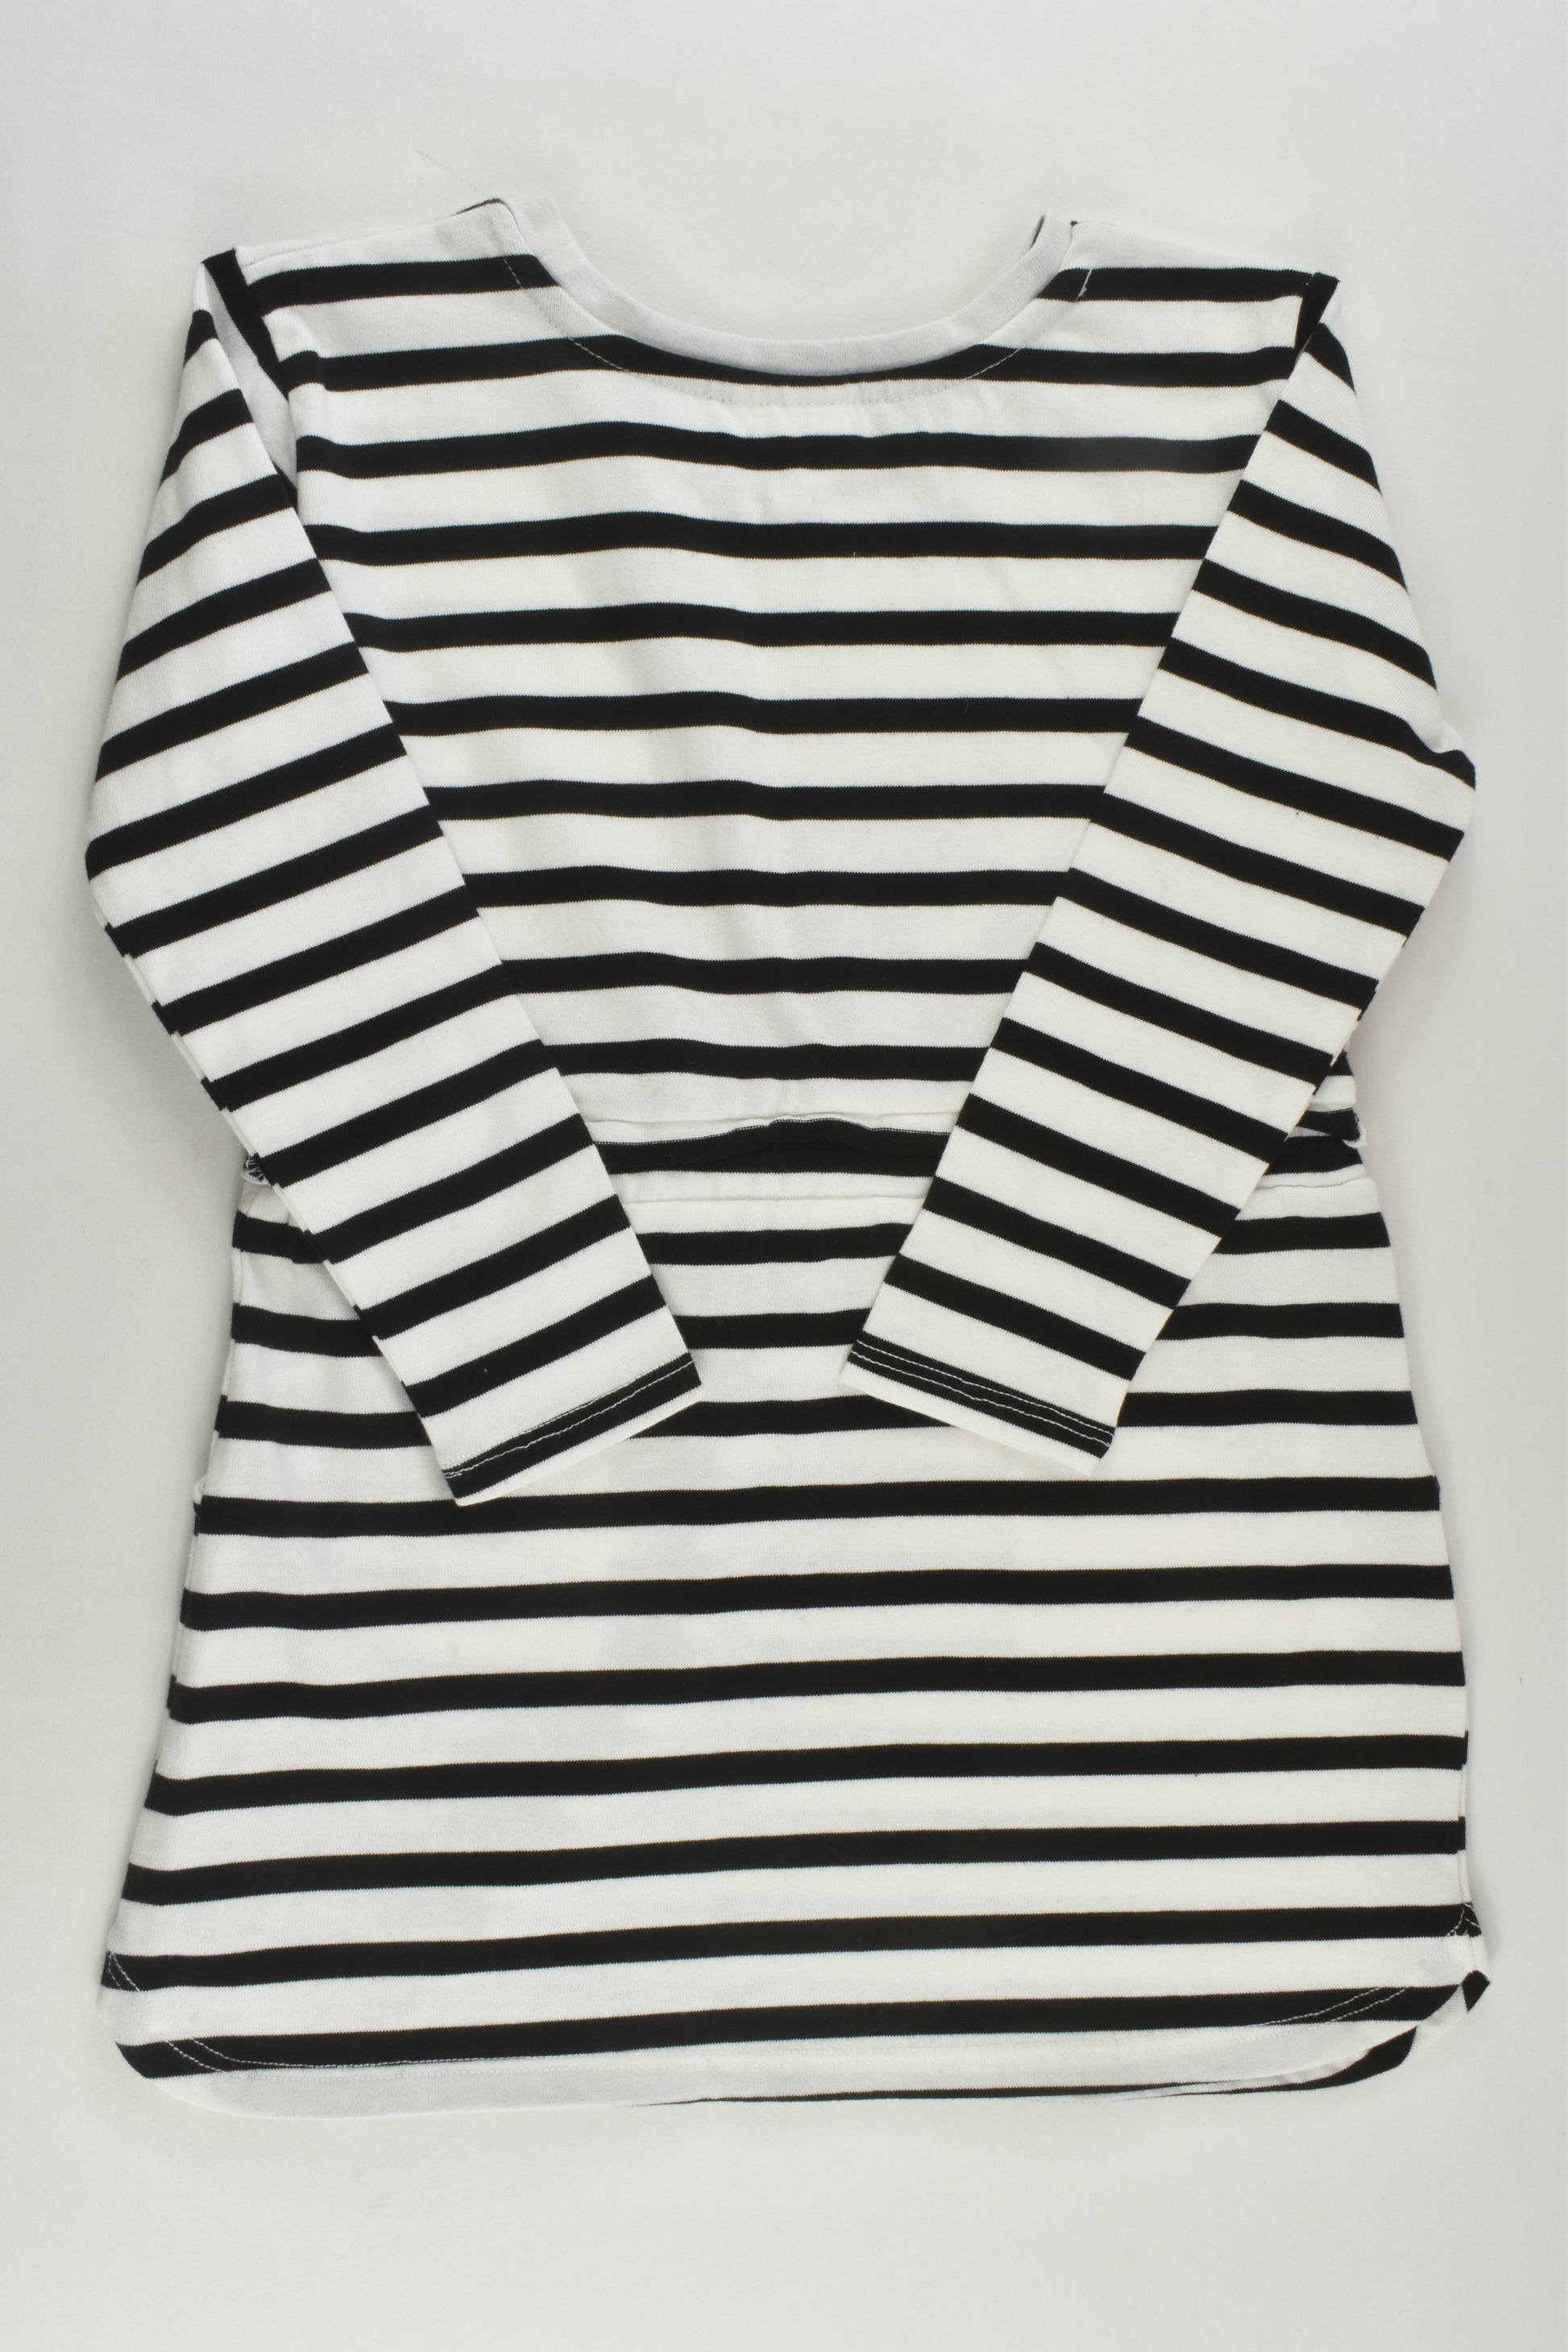 Seed Heritage Size 4 Striped Dress